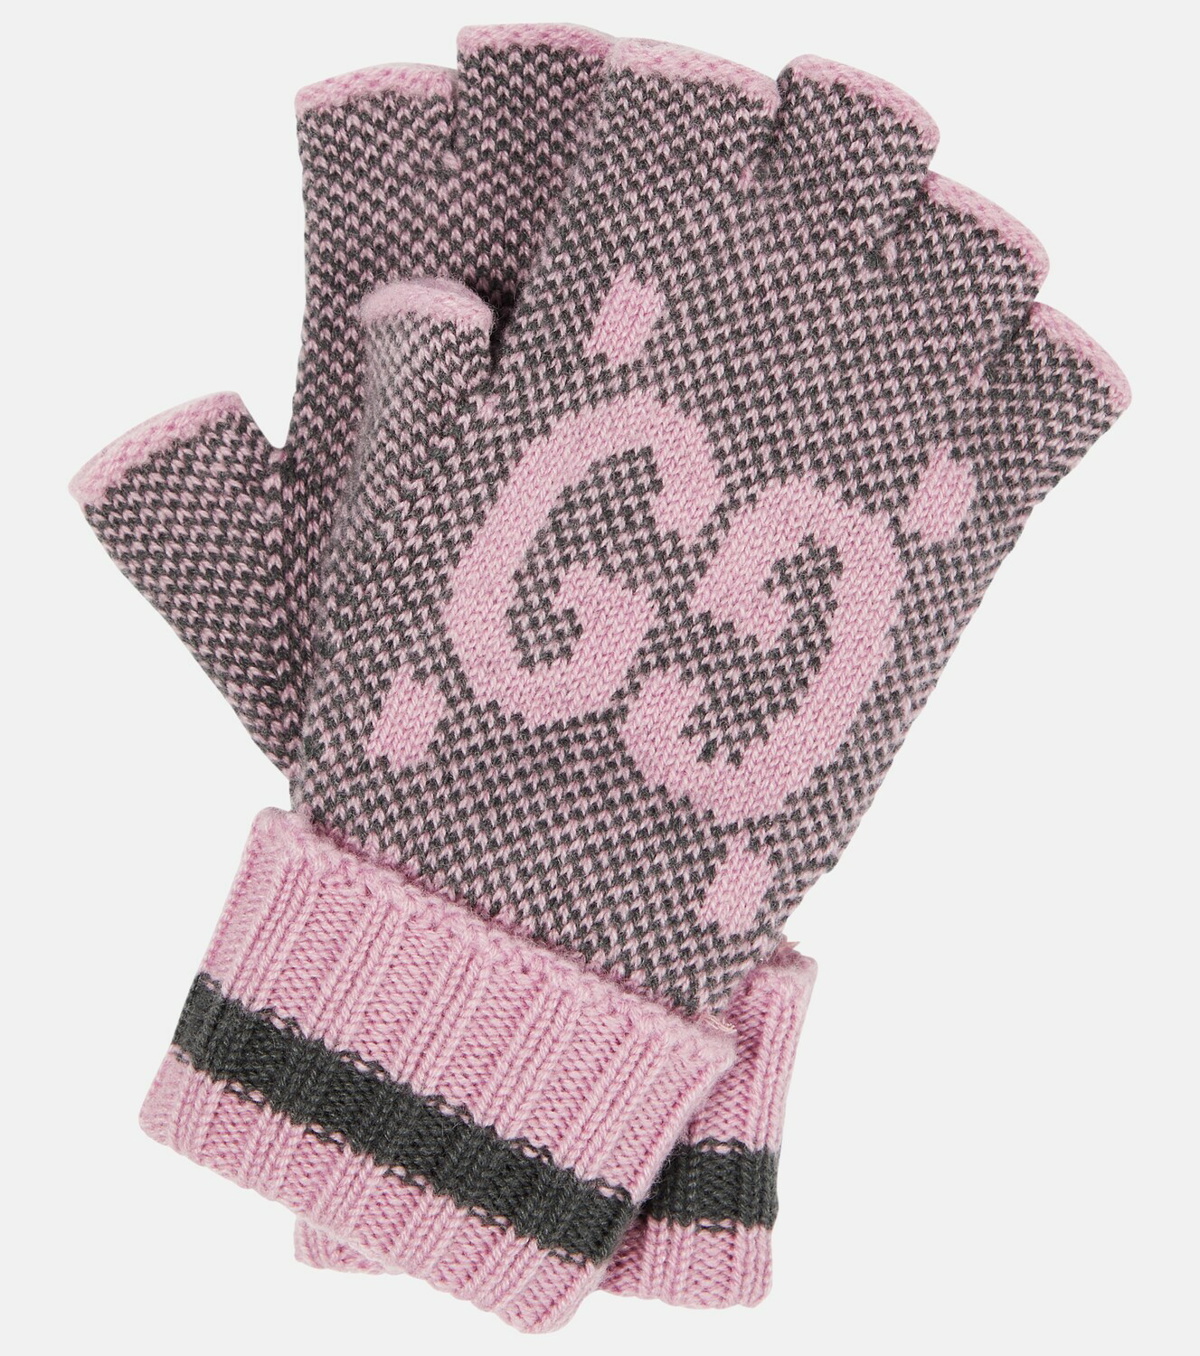 Gucci Embroidered Tulle Gloves